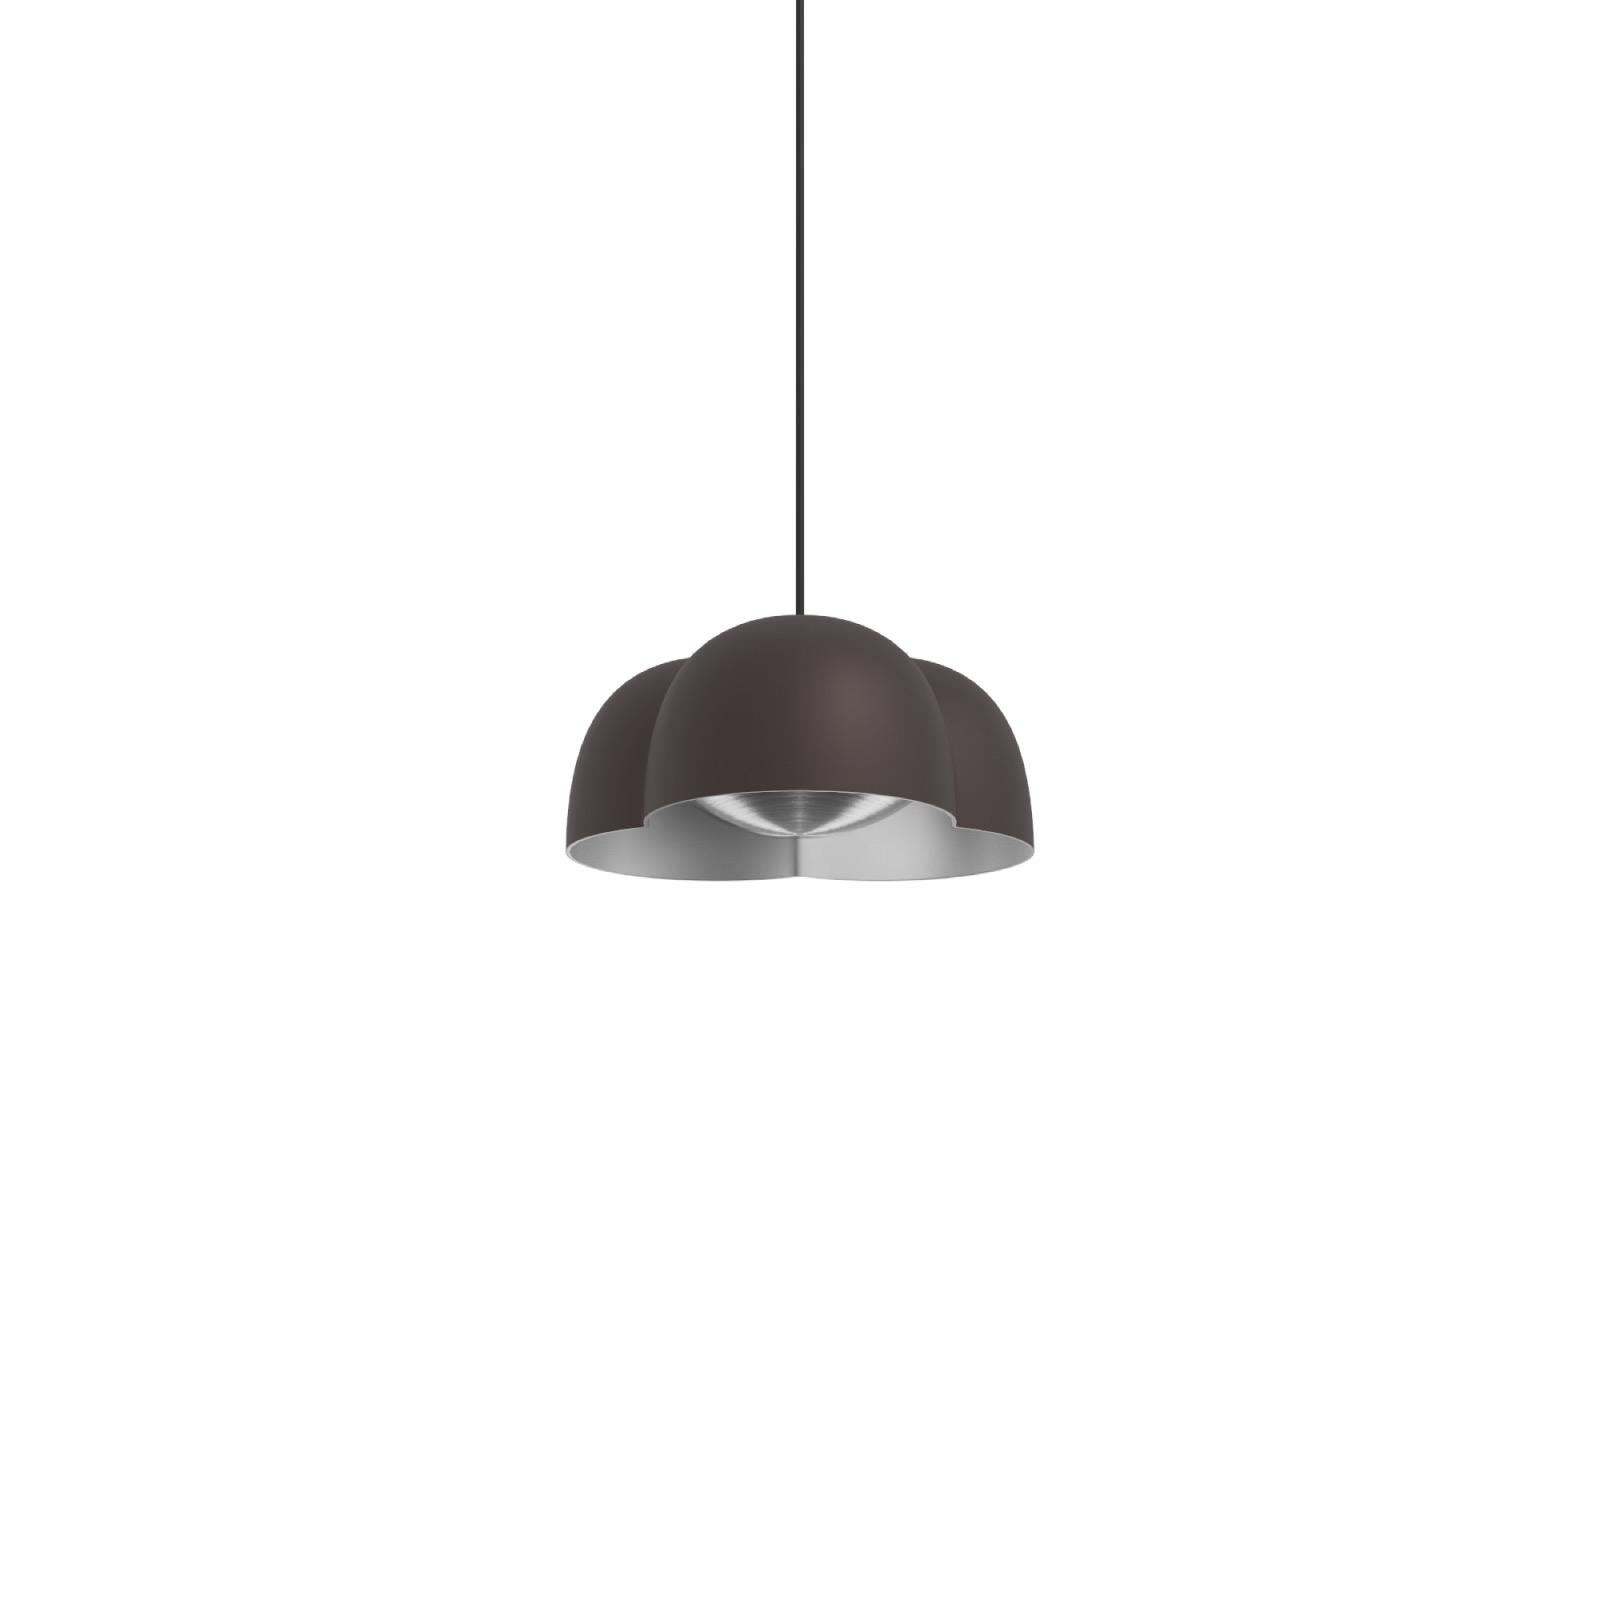 Cotton Pendant lamp by Sebastian Herkner x AGO Lighting
Small - Chocolate

Materials: Aluminum, Stainless 
Light Source: Integrated LED (SMD), DC
Watt. 4W
Color temp. 2700 / 3000K
Cable Length: 3m 

Available colors:
Charcoal, chocolate,